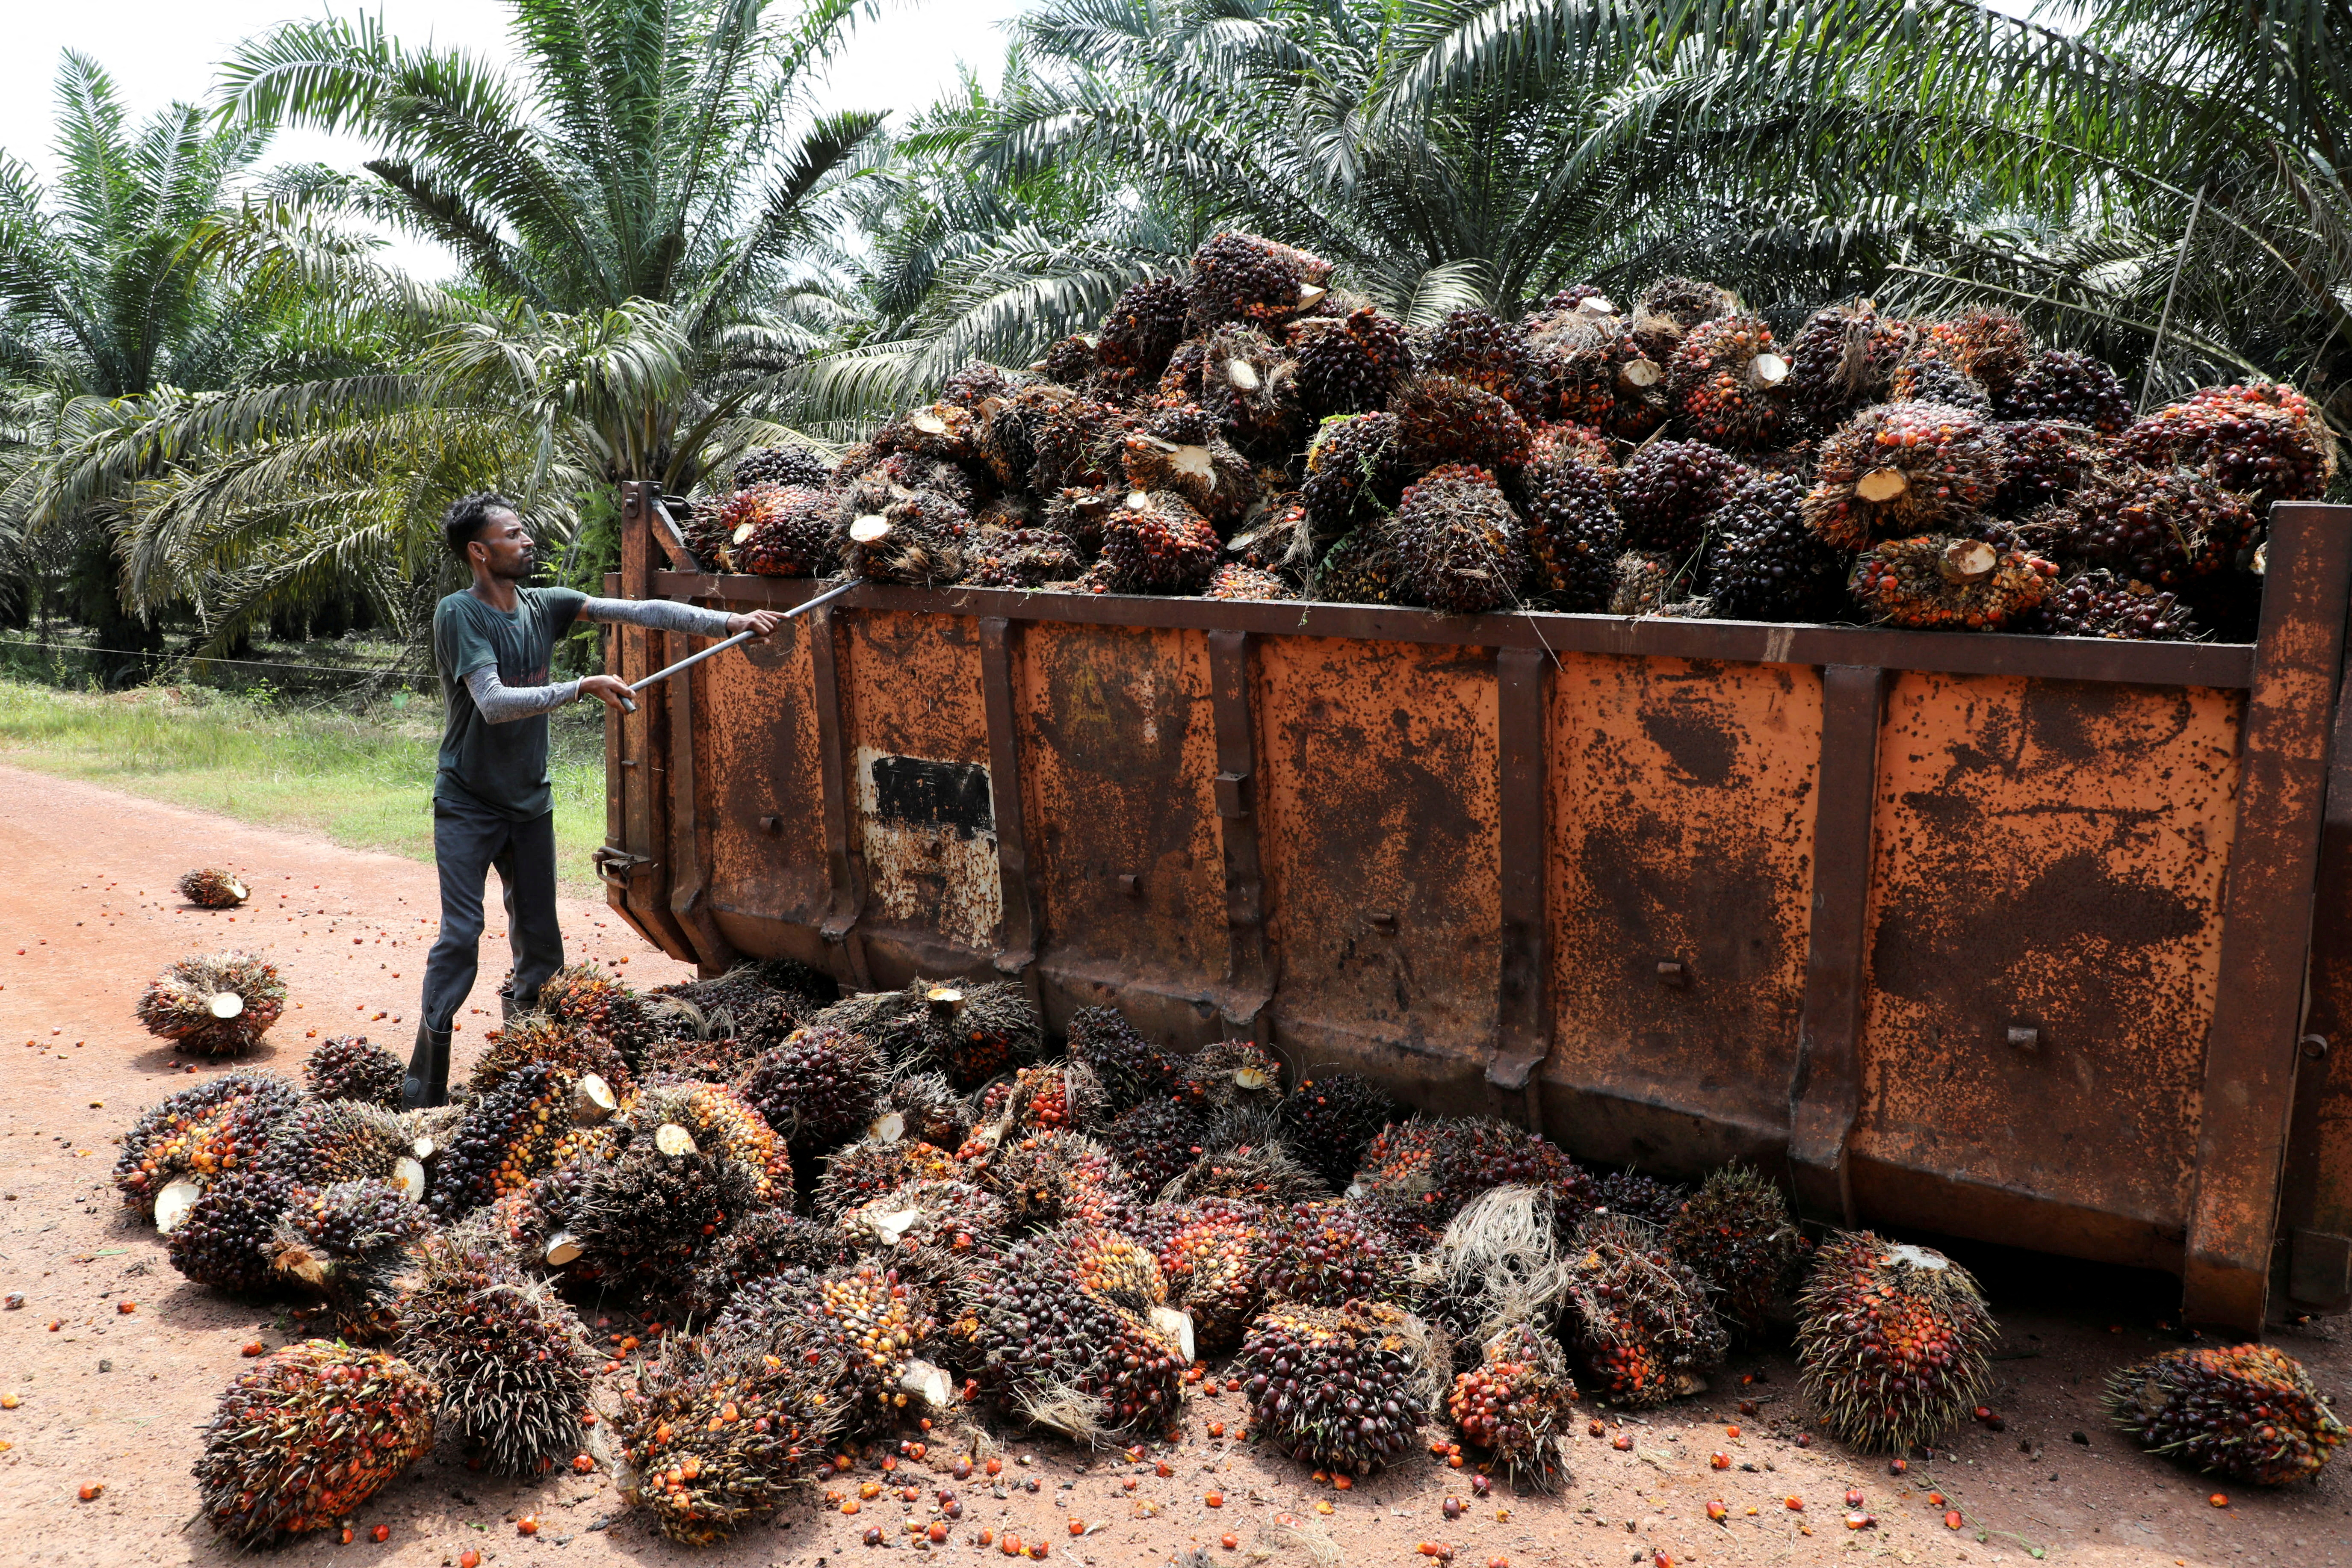 Worker loads palm oil fruit bunches at a plantation in Slim River, Malaysia